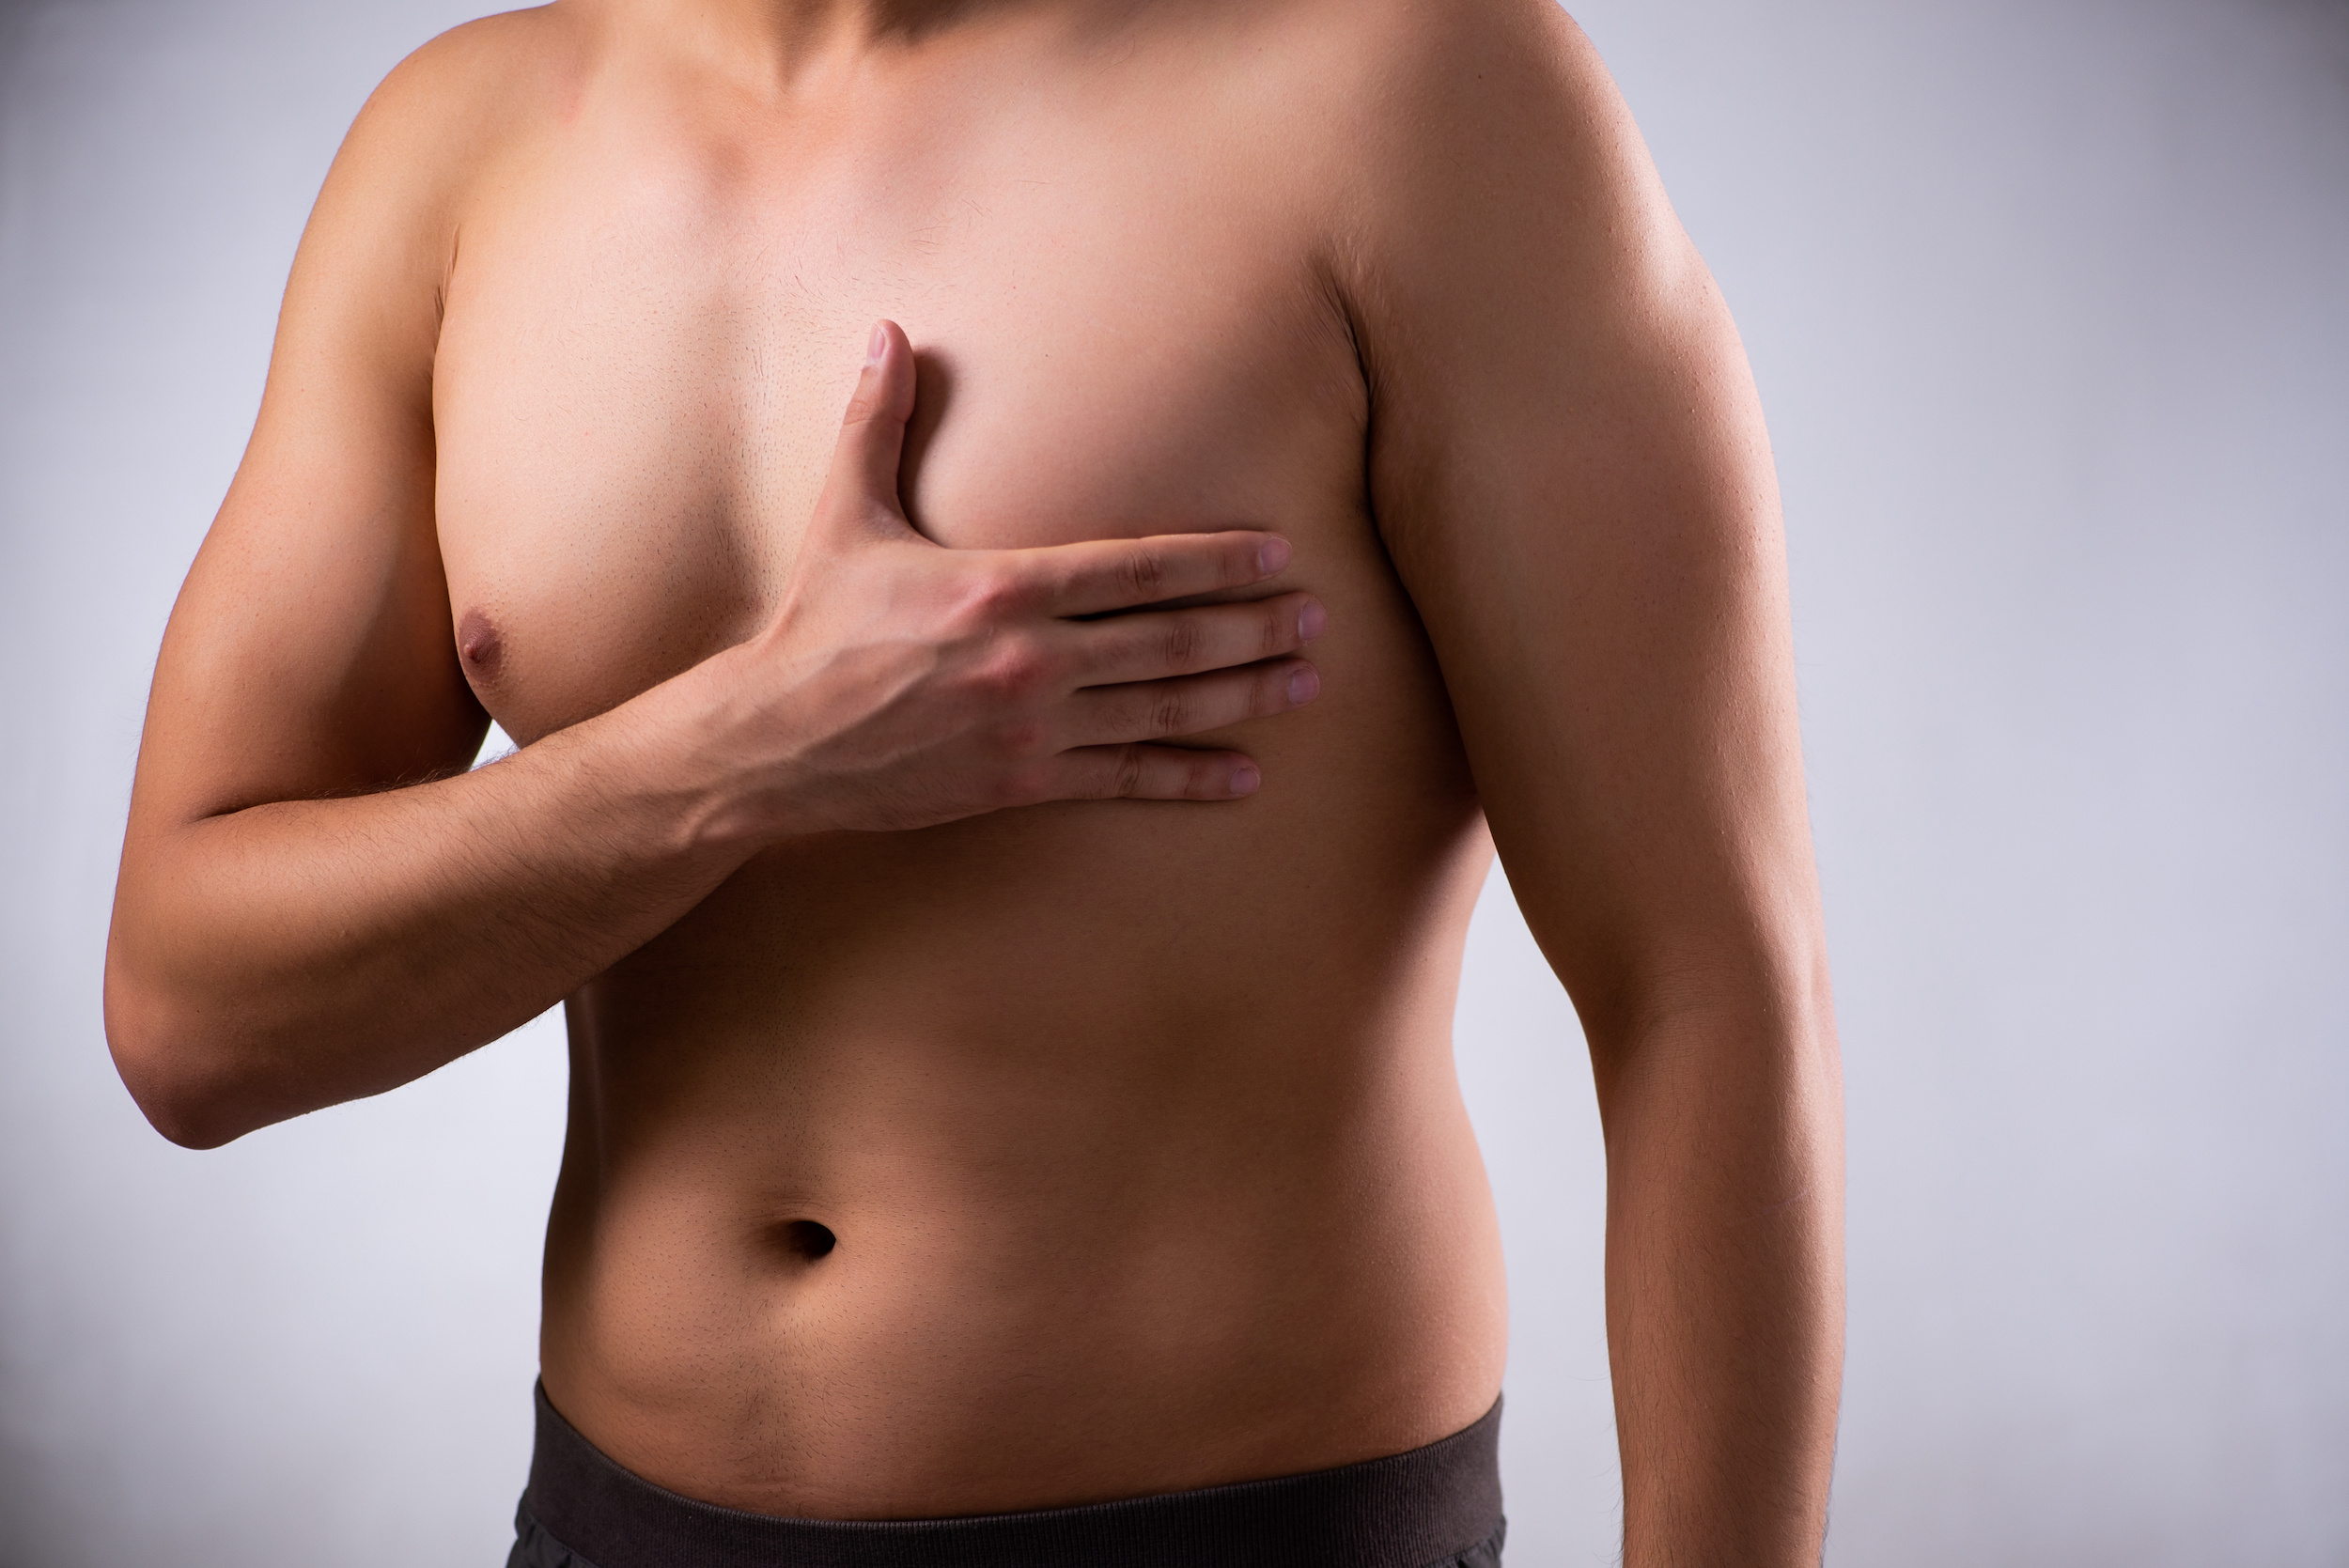 The 5 Most Common Questions We Get Asked About Gynecomastia (AKA Male Breast Tissue)